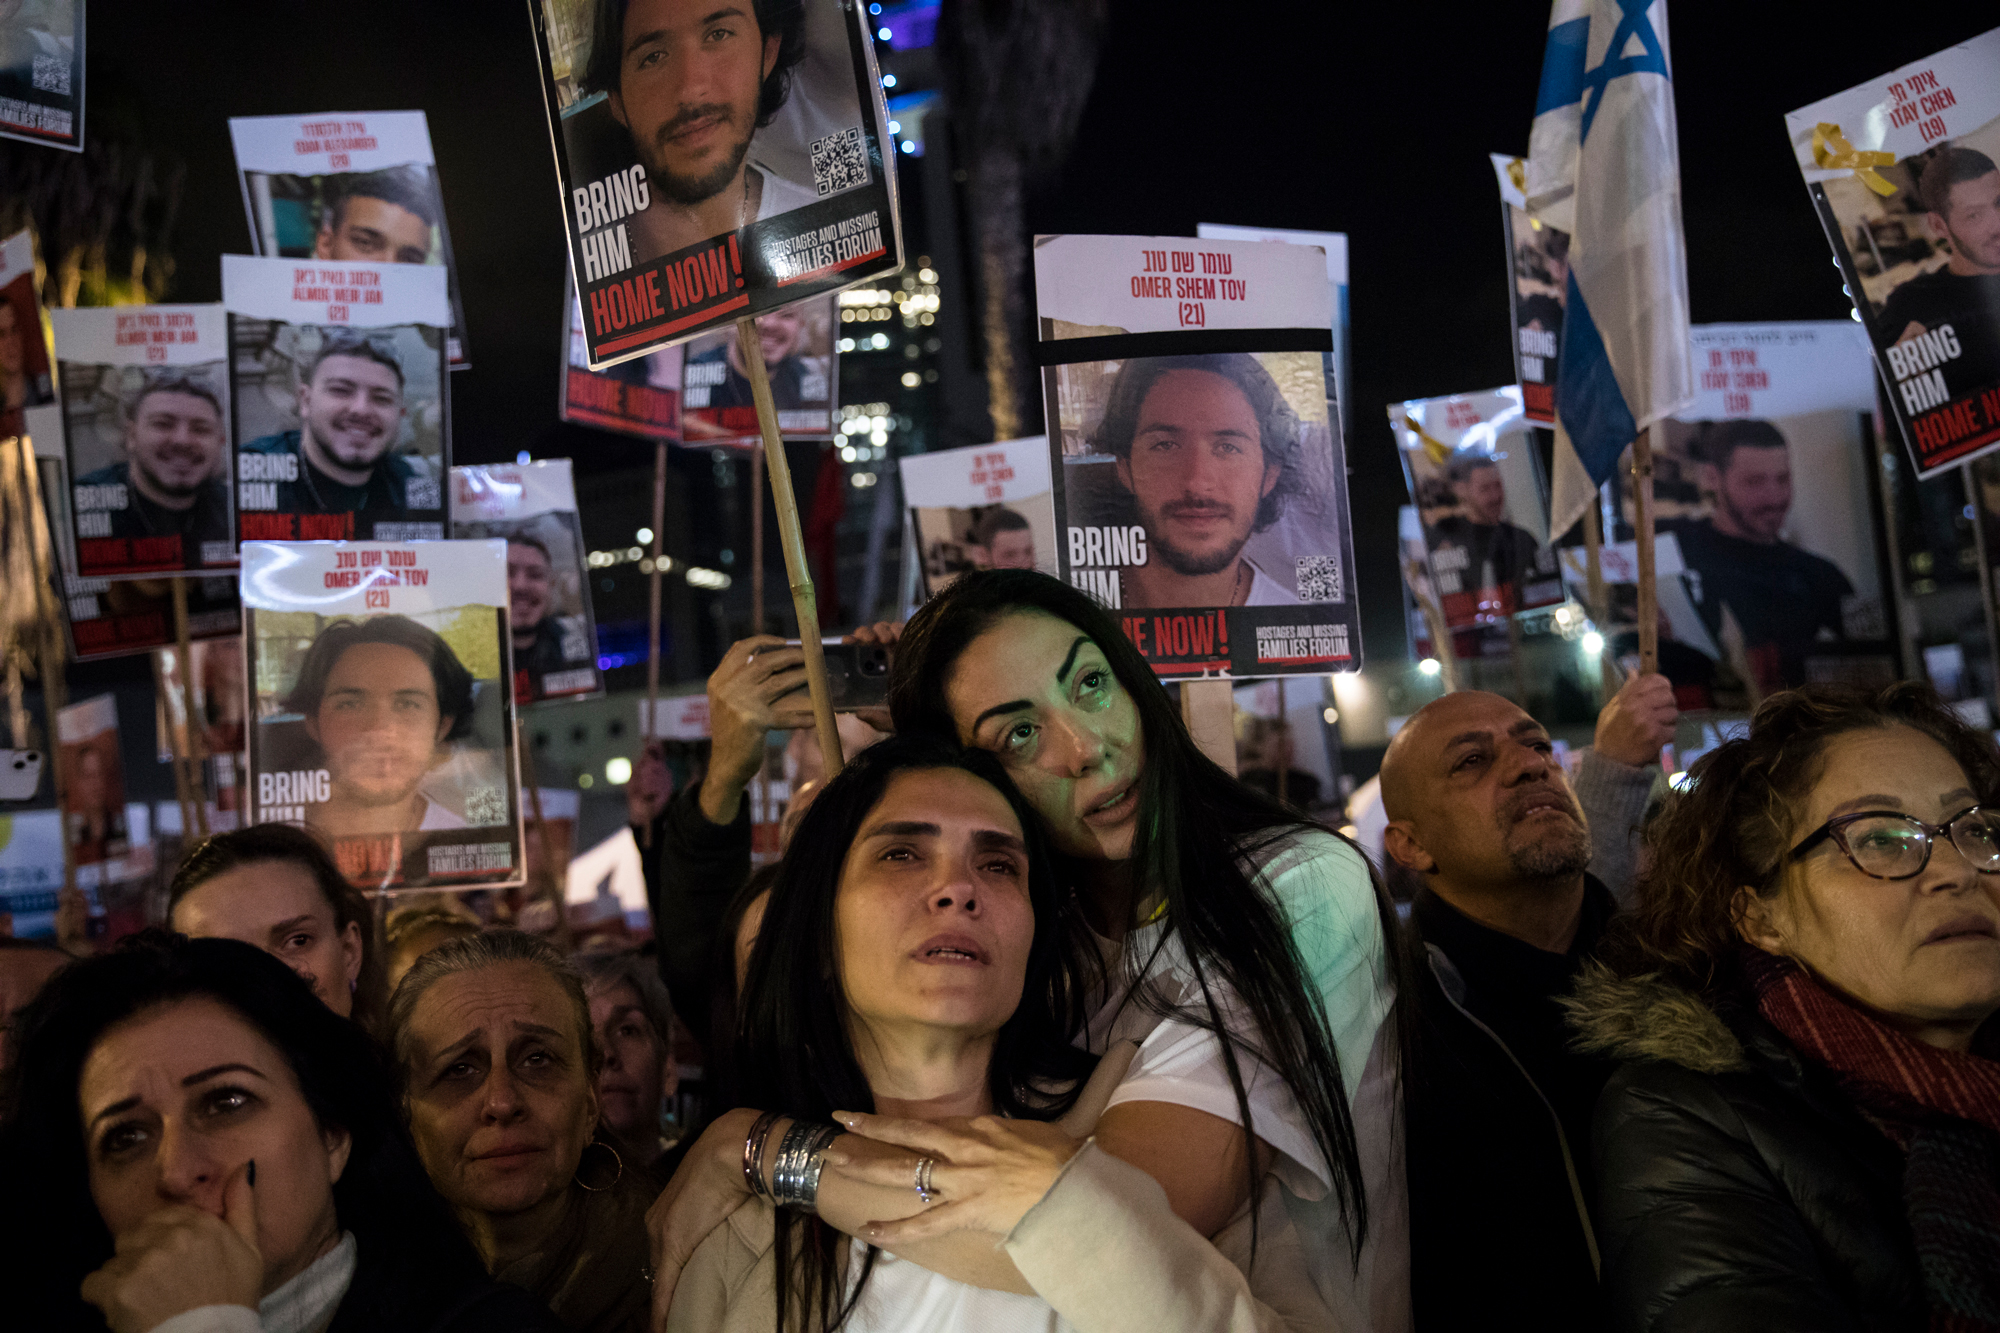 People react during a rally to mark 100 days of captivity for hostages by Hamas in Gaza on January 13 in Tel Aviv, Israel.